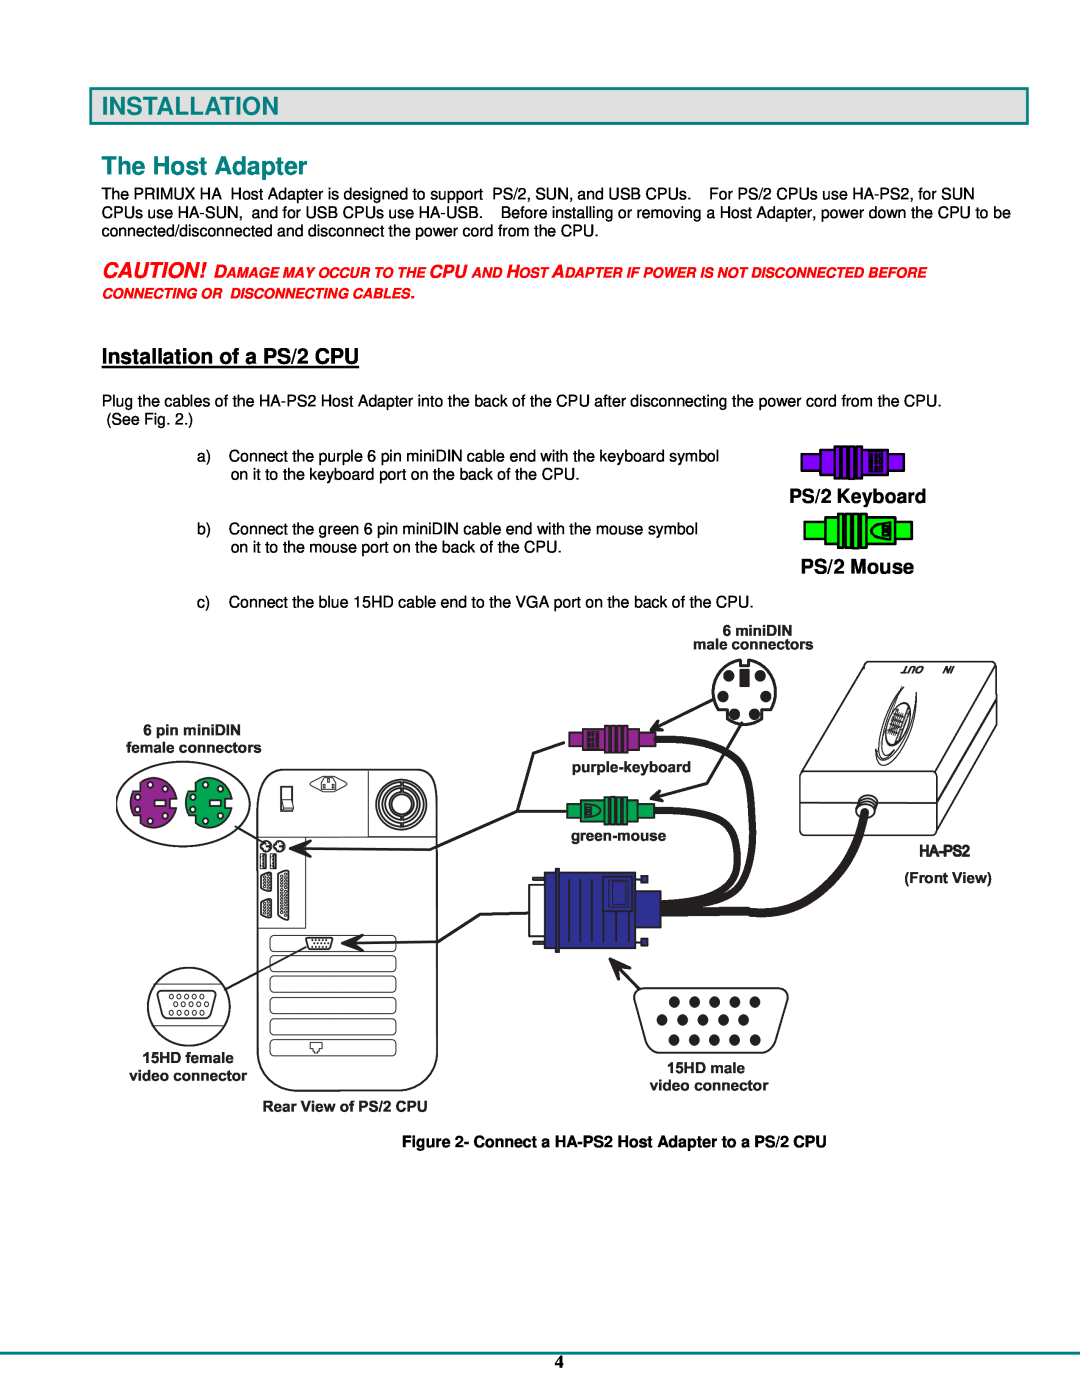 Network Technologies CAT5 The Host Adapter, Installation of a PS/2 CPU, green-mouse, HA-PS2, FrontView, 15HDfemale 